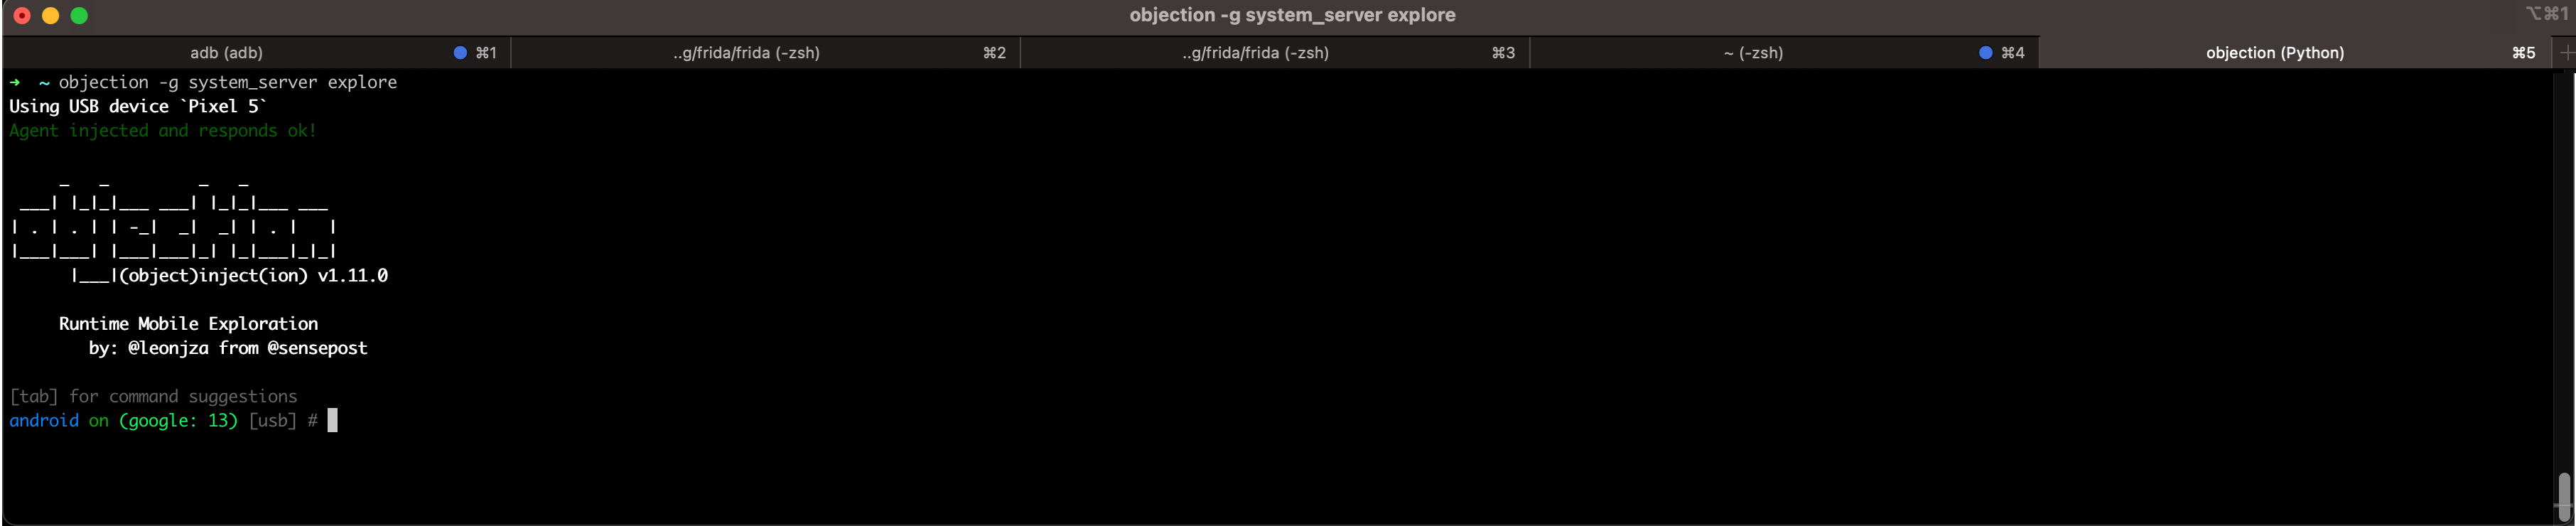 objection_explore_android_system_server